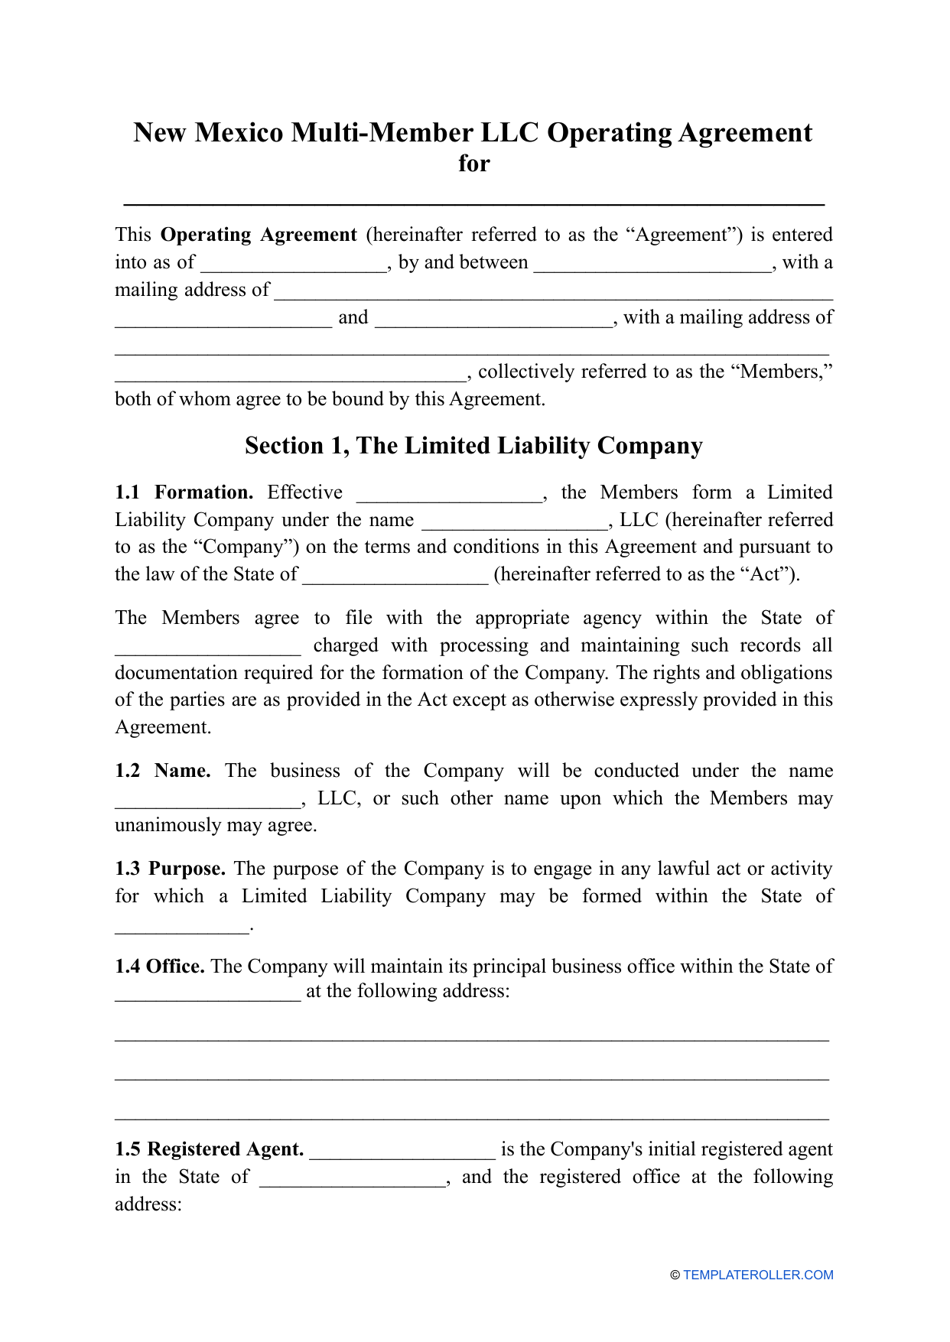 Multi-Member LLC Operating Agreement Template - New Mexico, Page 1